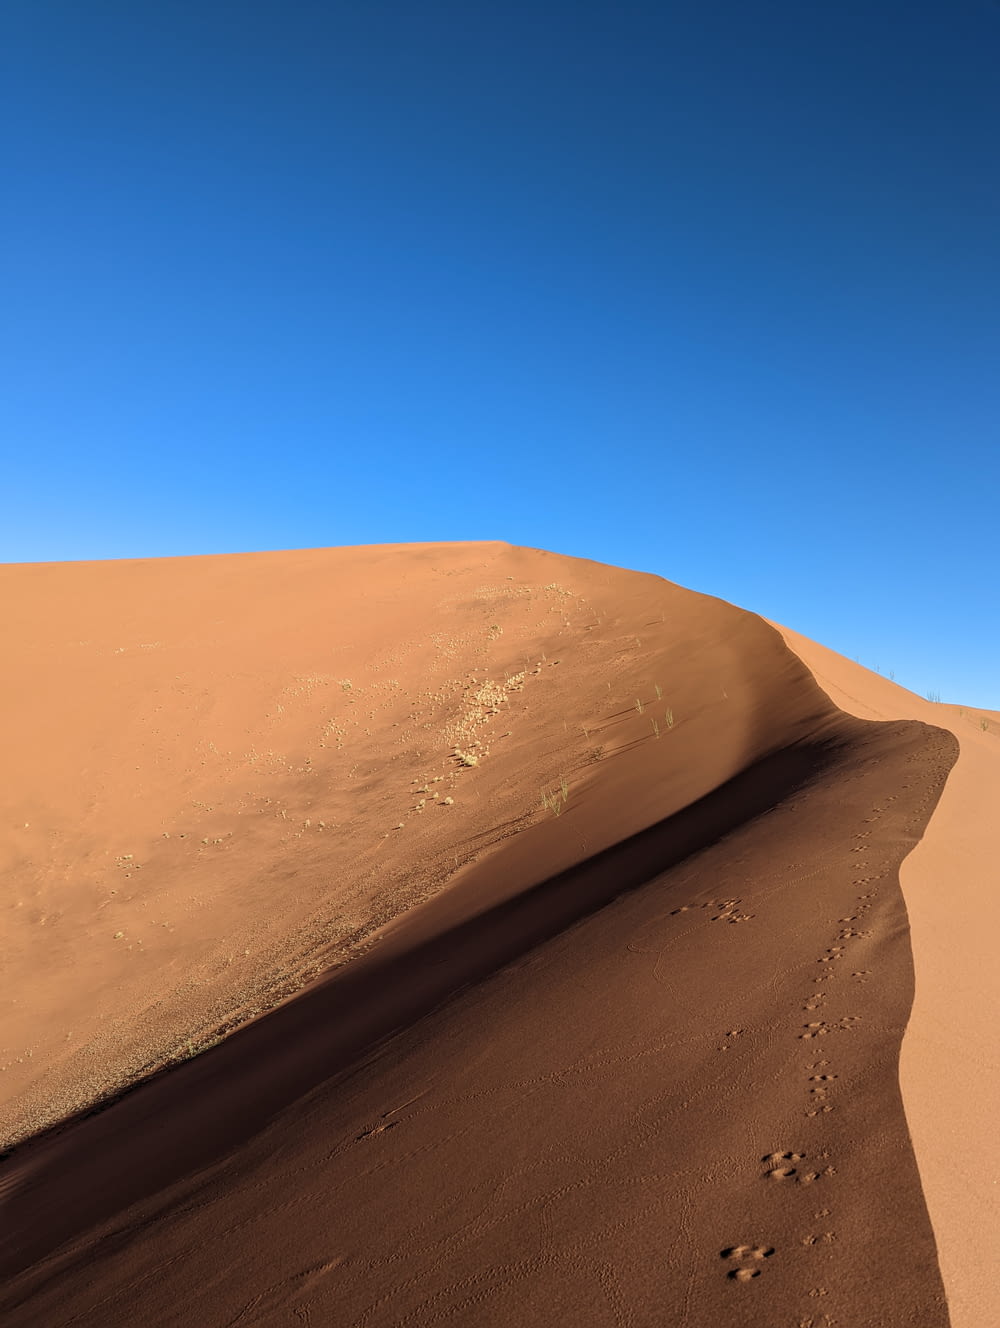 a large sand dune with footprints in the sand